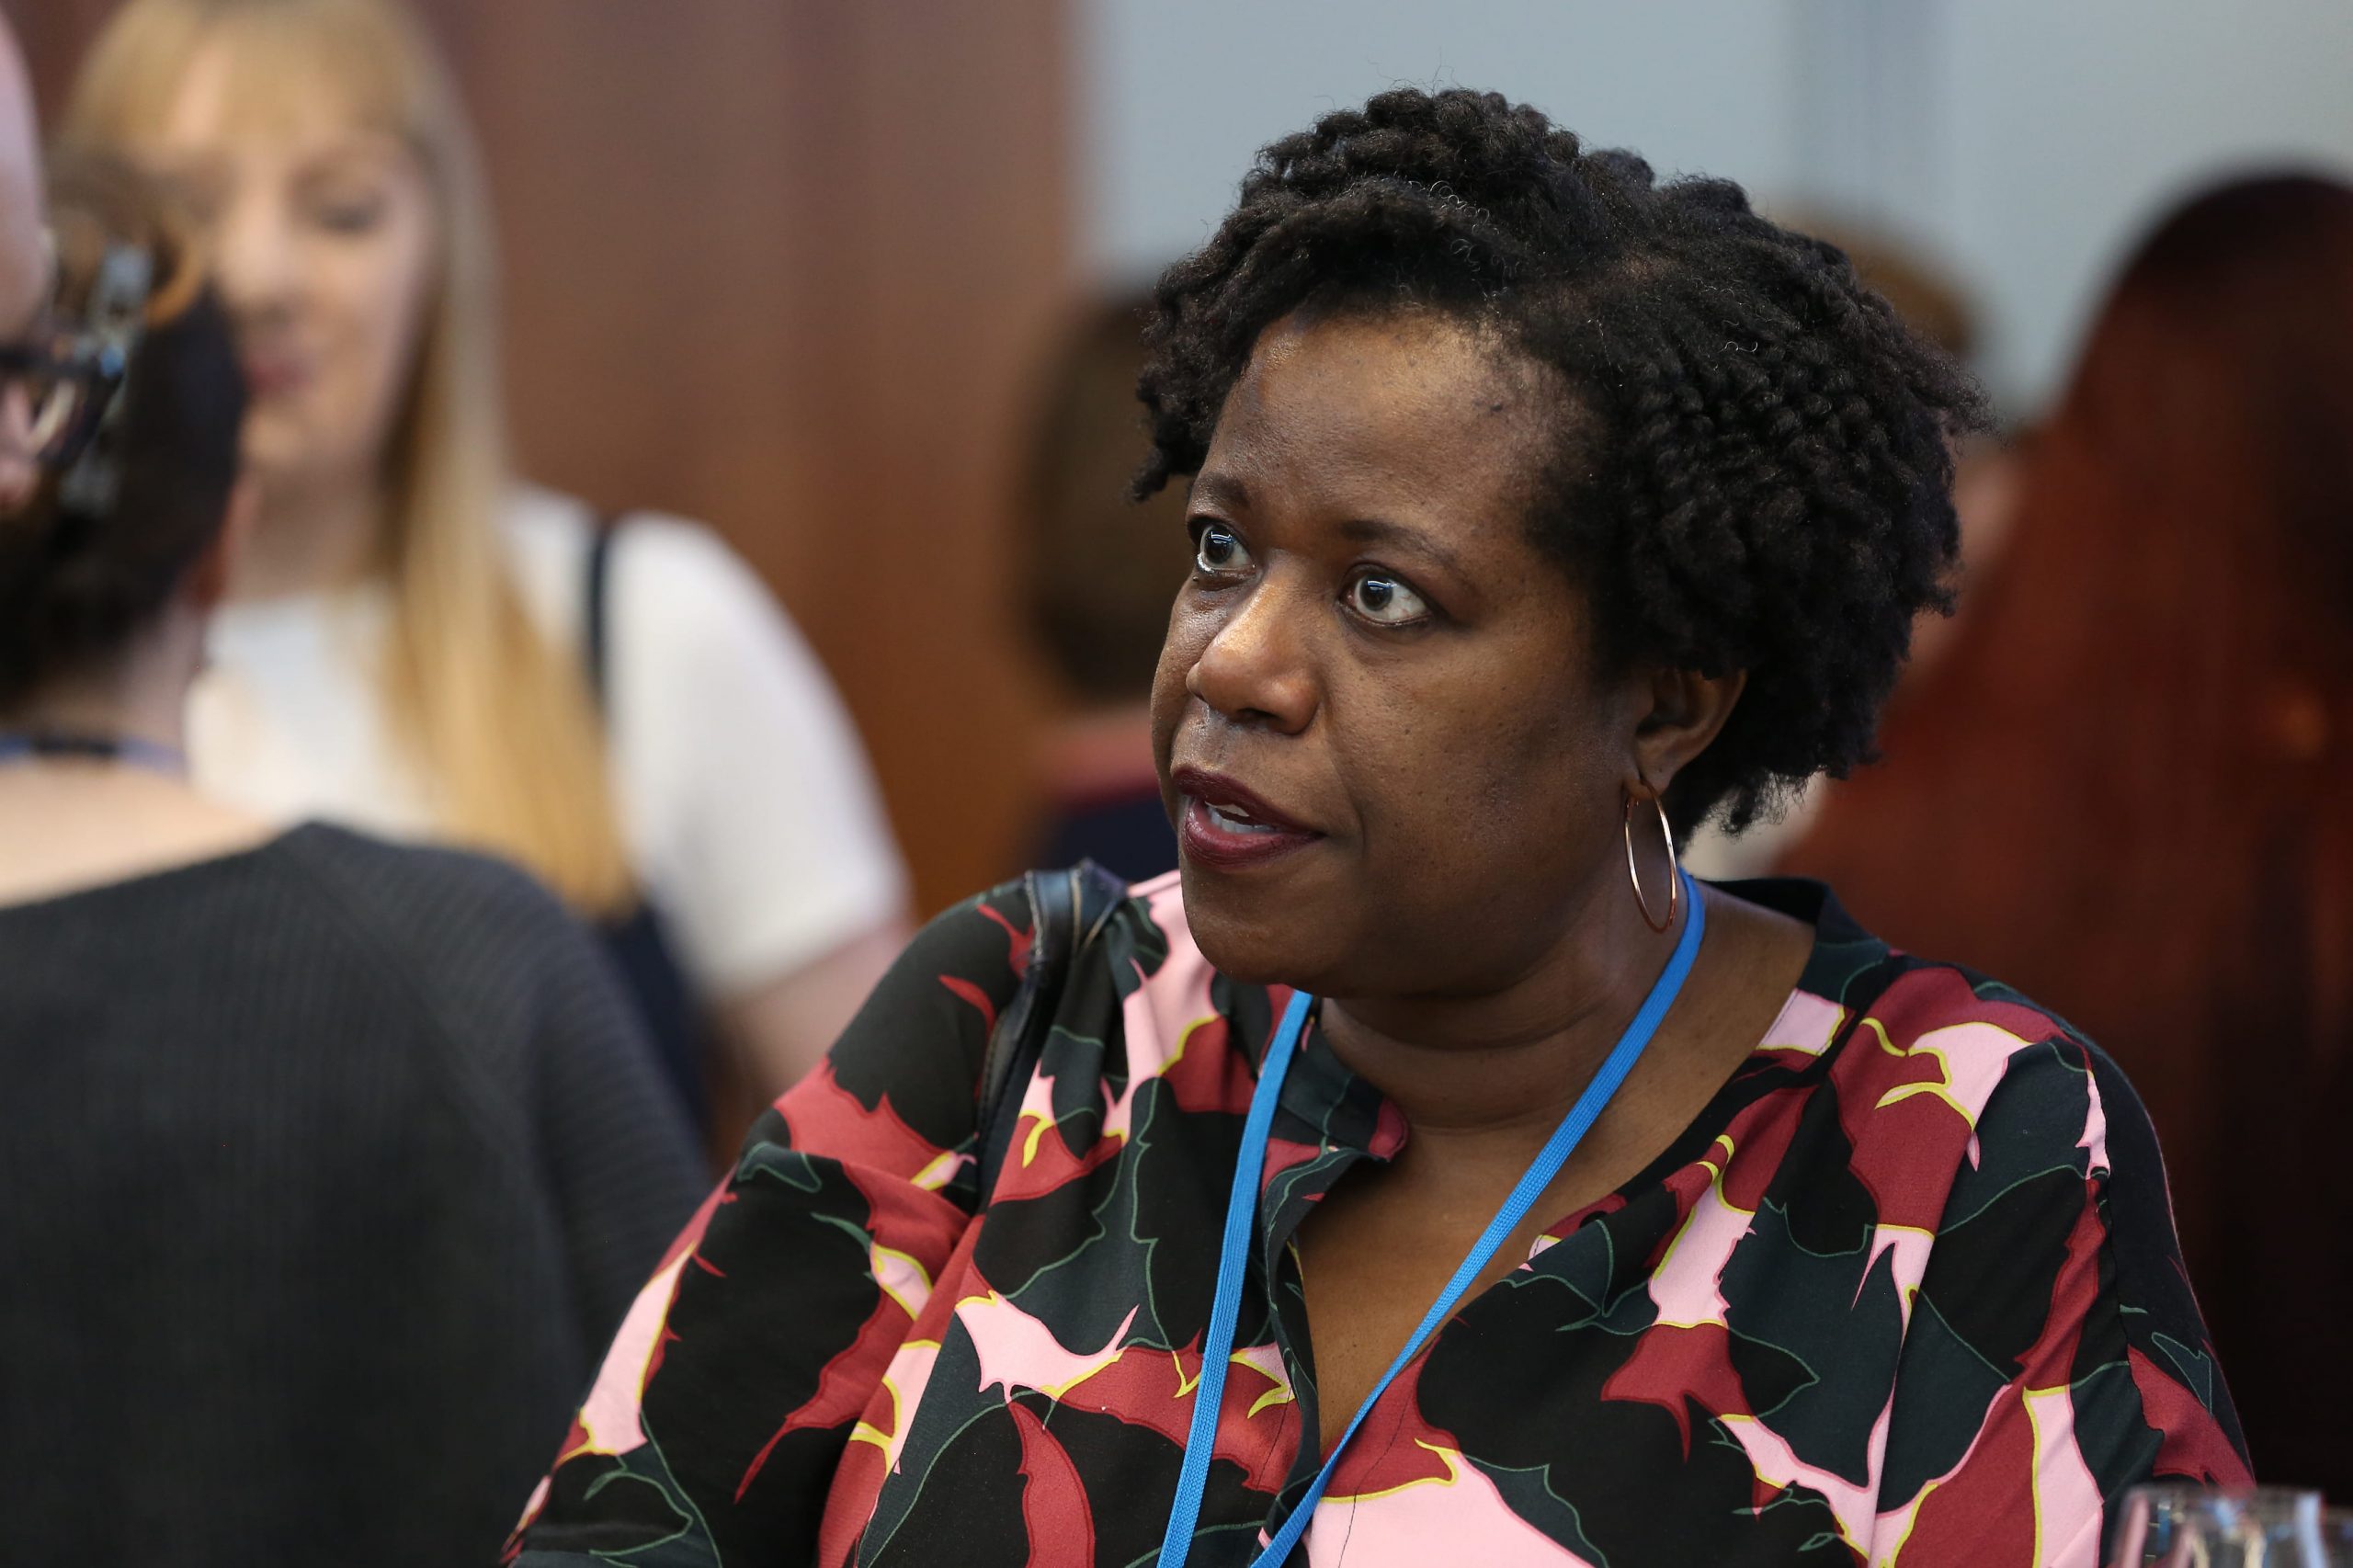 Images from the WATC Gender Networks 10th Anniversary - London Stock Exchange 15MAR19